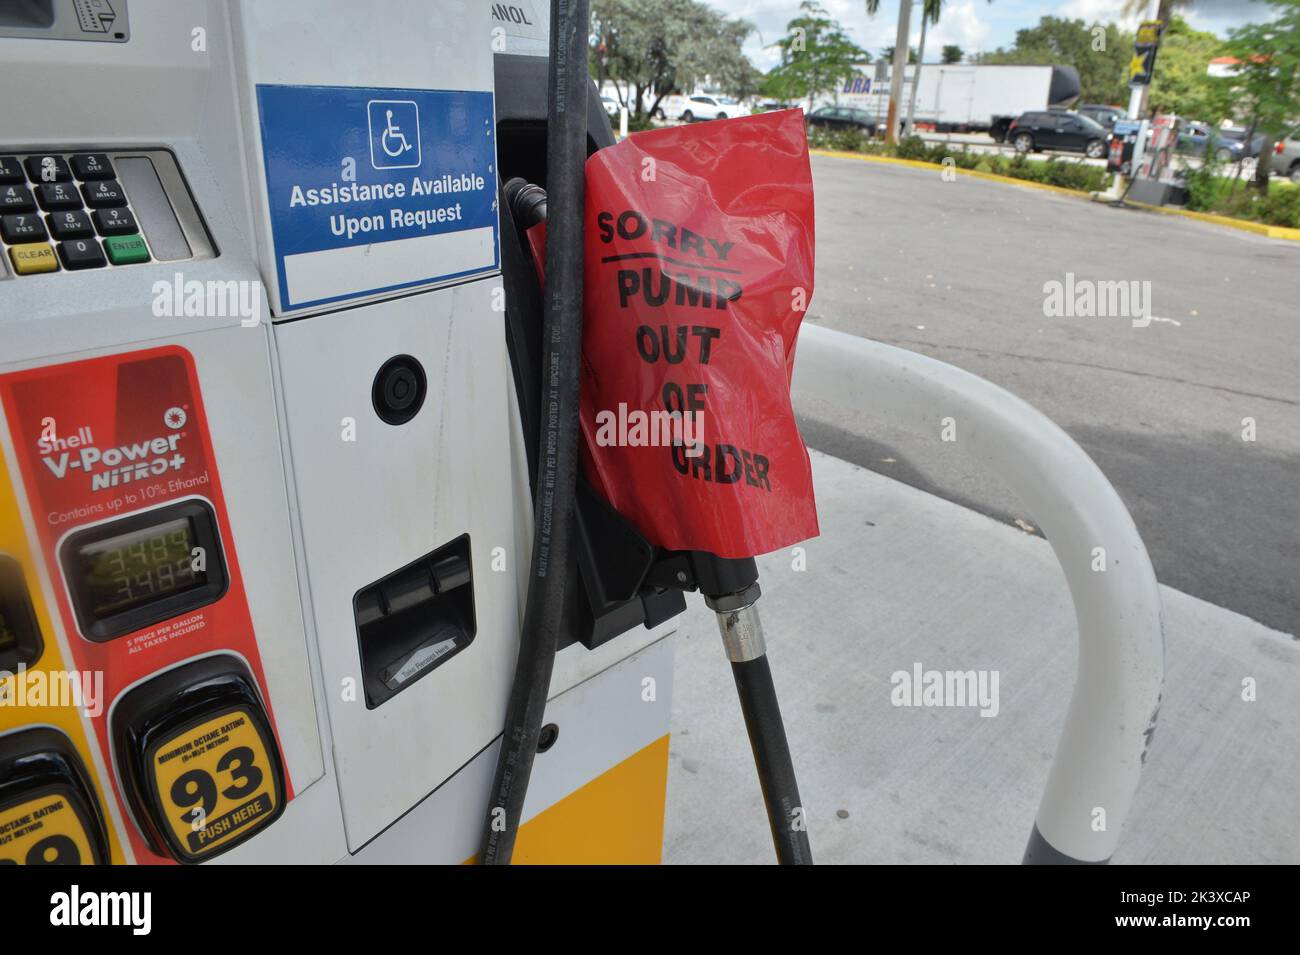 FORT LAUDERDALE, FL - SEPTEMBER 22, 2022: Hurricane Ian makes landfall in Florida as dangerous Category 4 hurricane. Historic File photos of Hurricanes in South Florida People: Gas Pump Credit: Storms Media Group/Alamy Live News Stock Photo